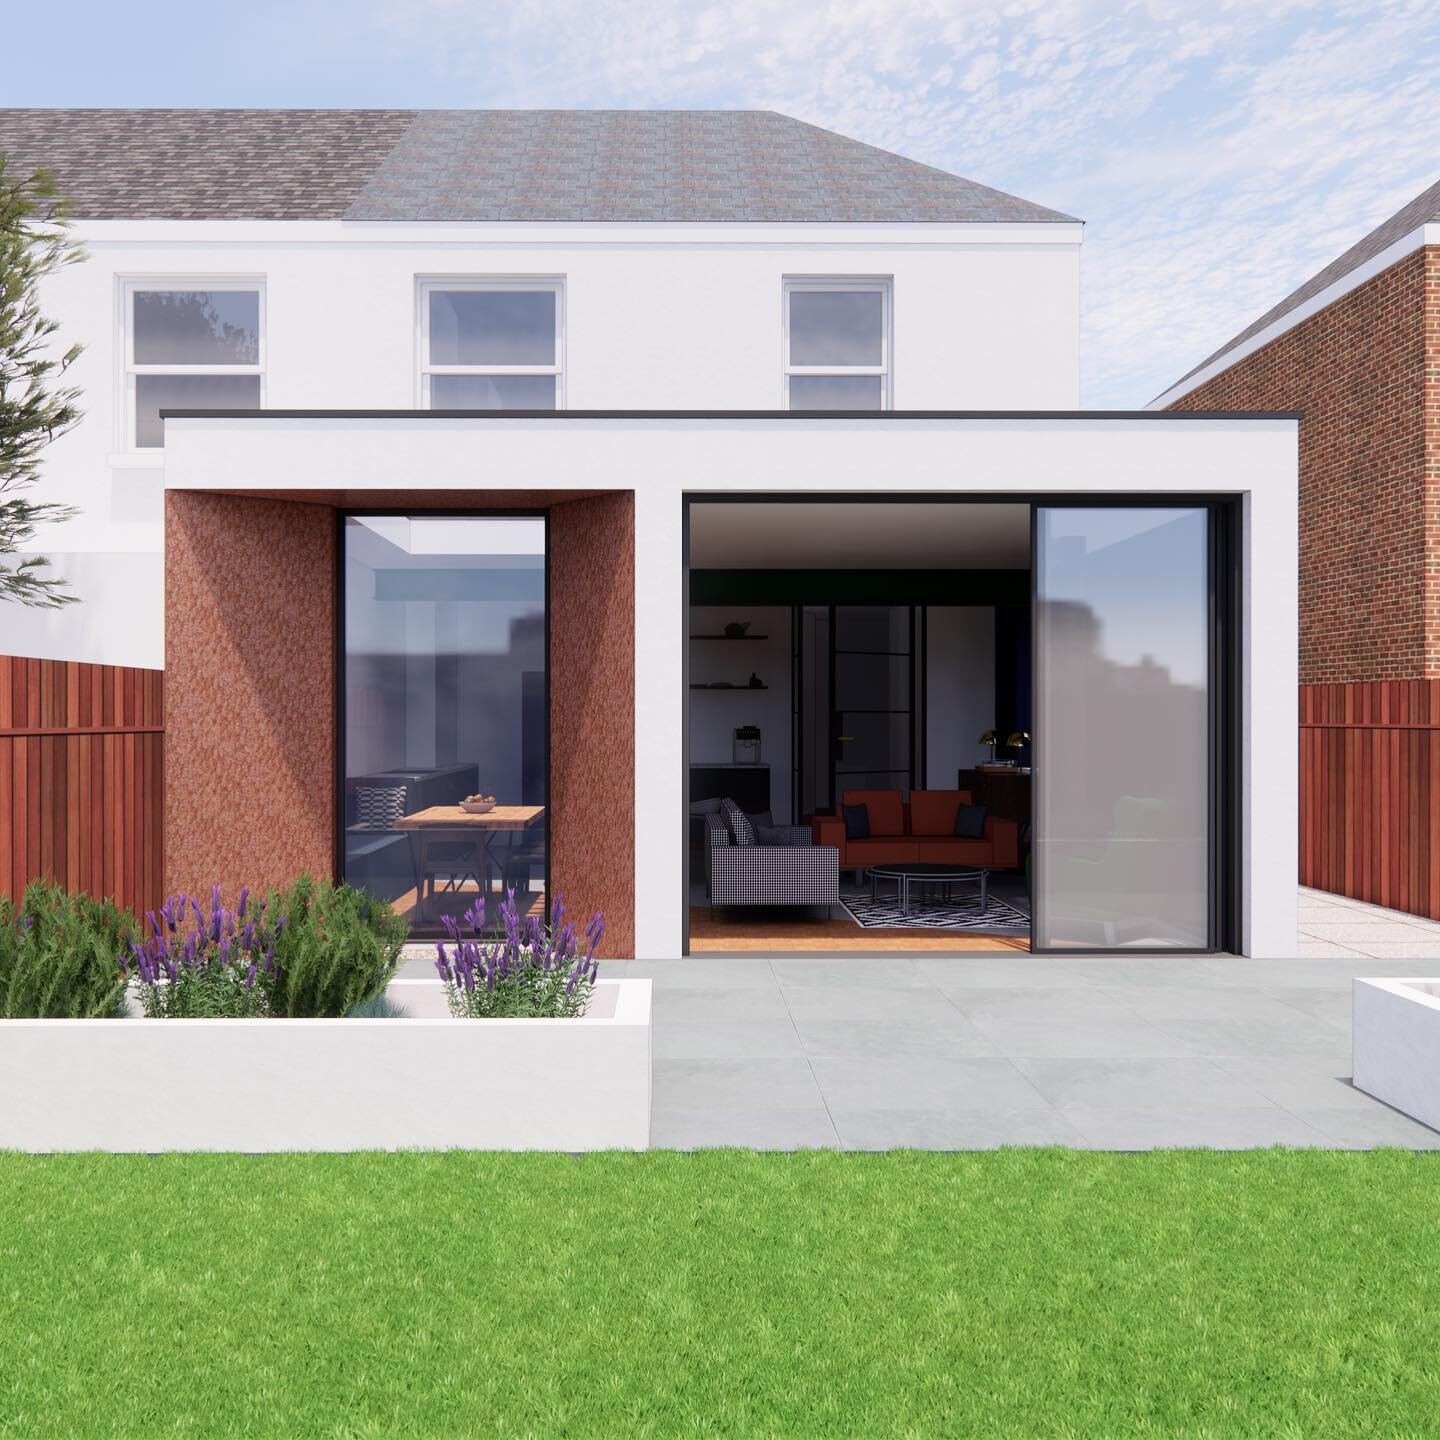 Rear extension design with tapered corten window reveal. 

#archdaily #archviz #architecture #homeextension #hove #brighton #london #dontmoveimprove #renovate #ciat #extension